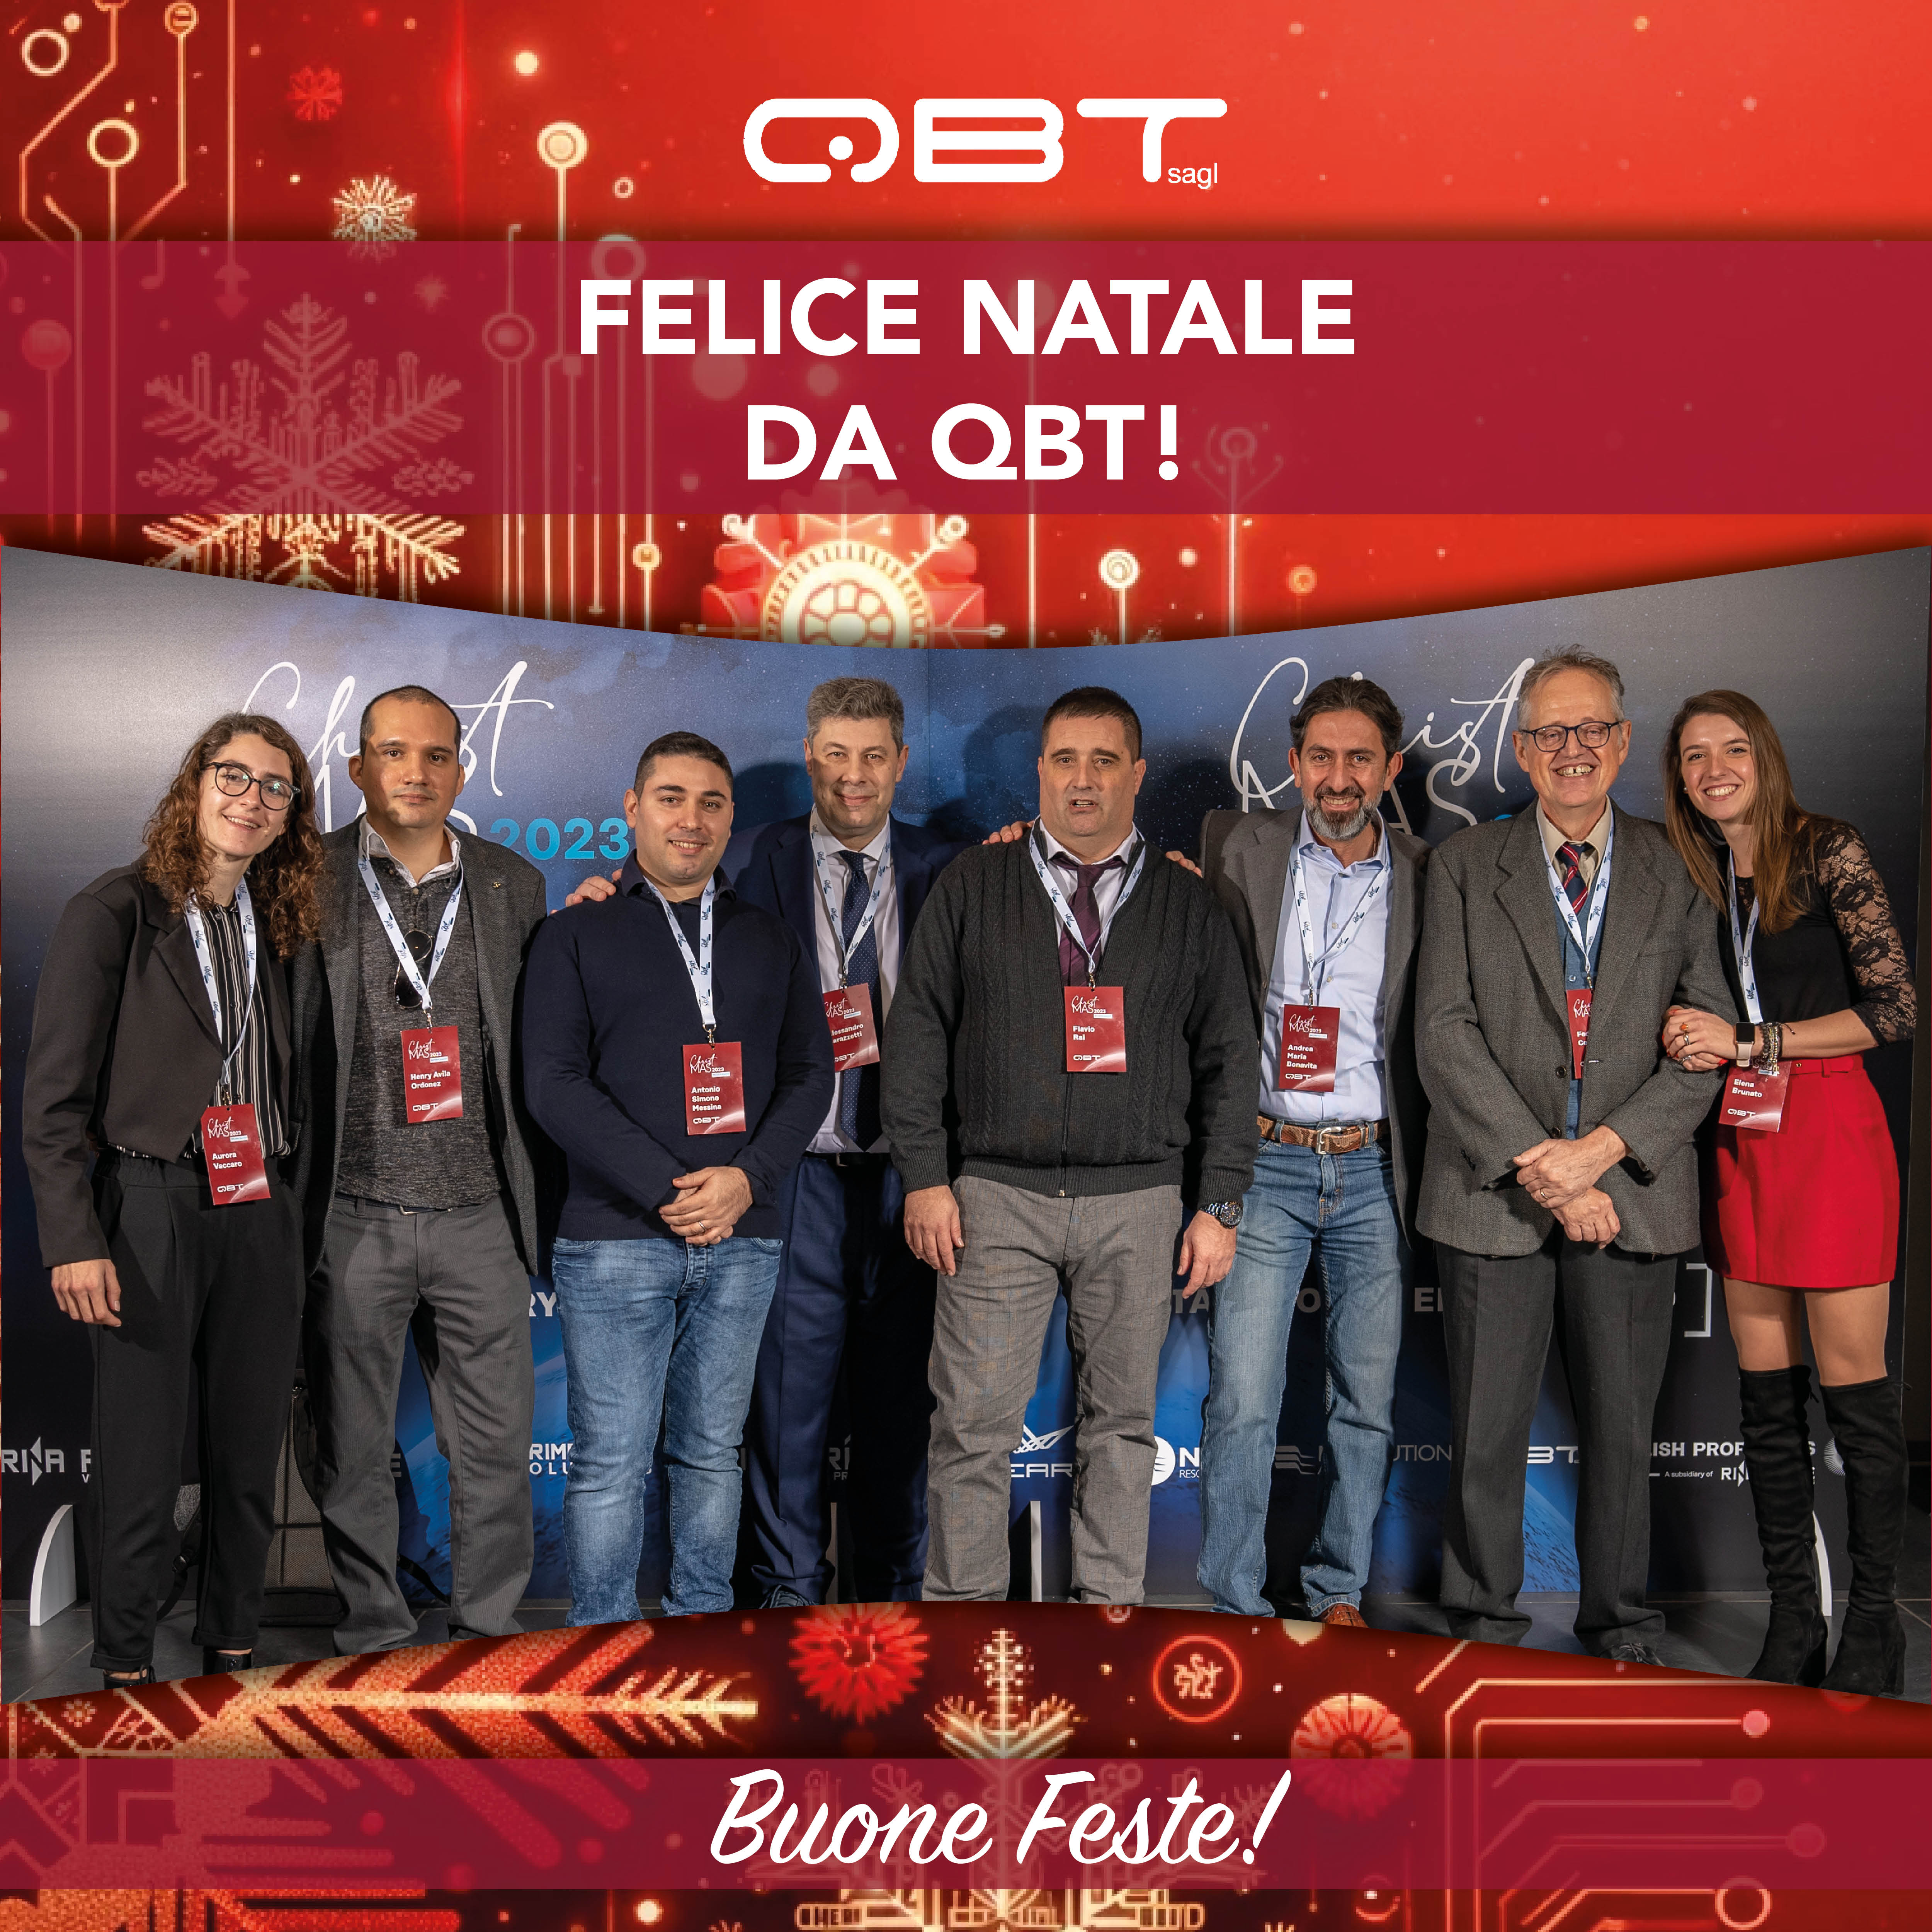 The QBT team wishes you a happy and peaceful Christmas!